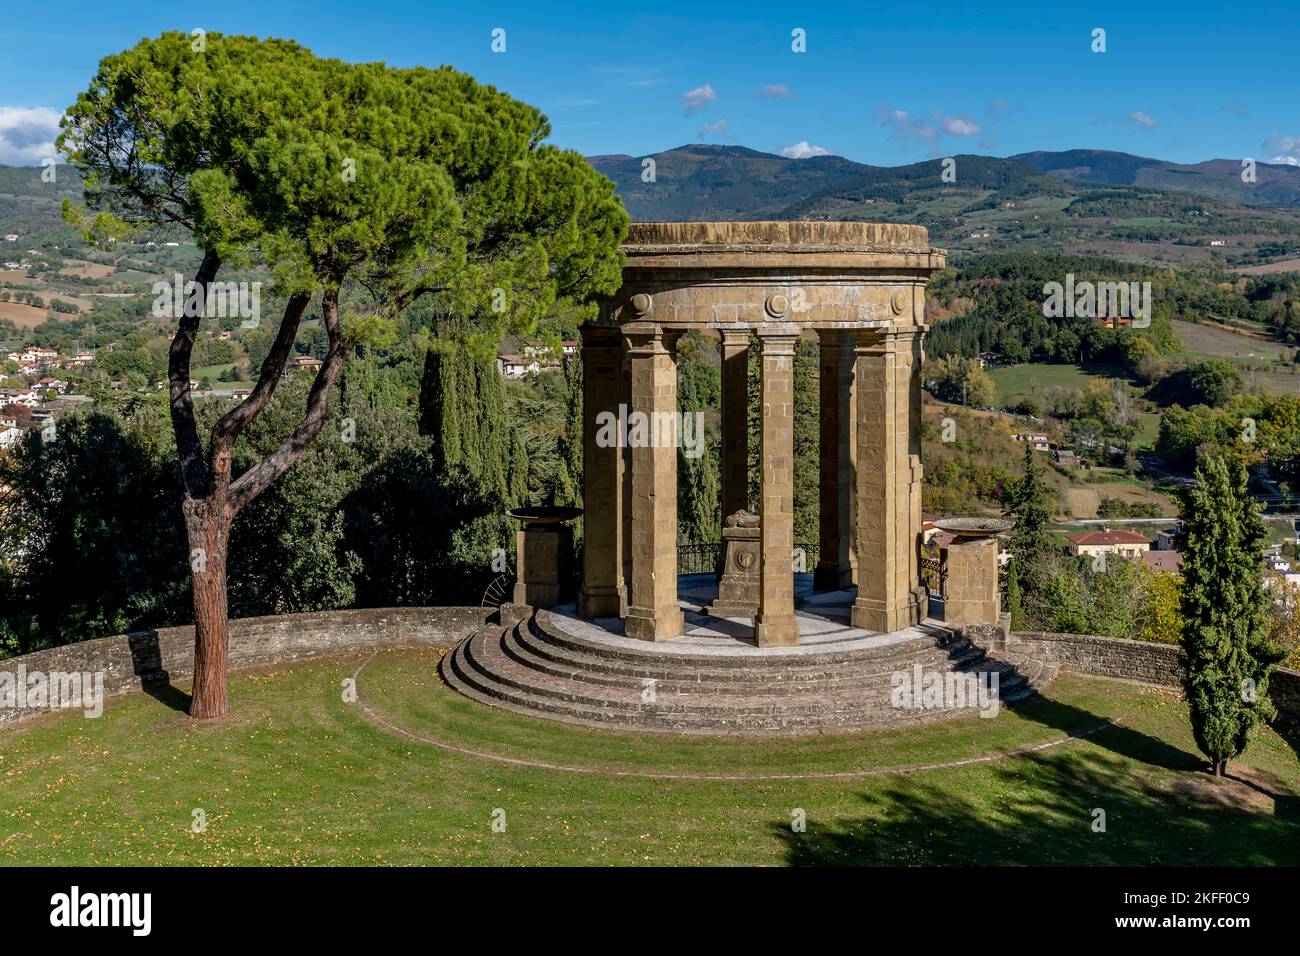 The monument to the fallen of all wars in the historic center of Poppi, Arezzo, Italy, on a sunny day Stock Photo